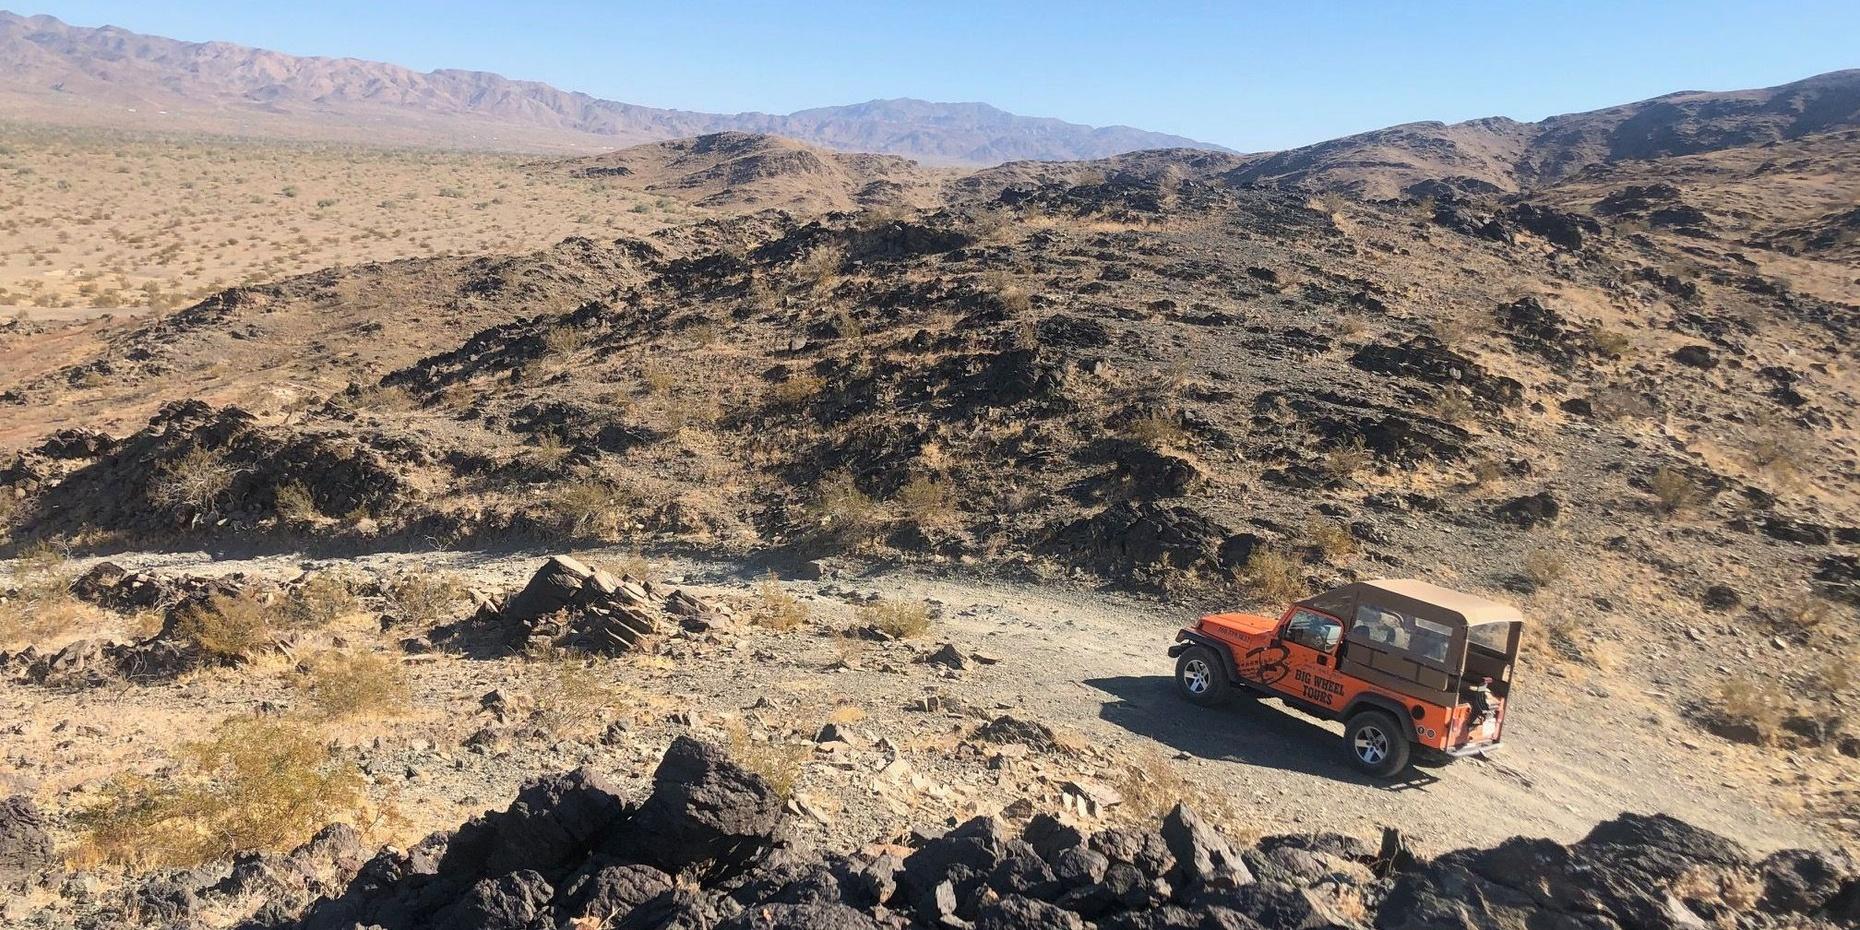 The San Andreas Fault Jeep/SUV Tour